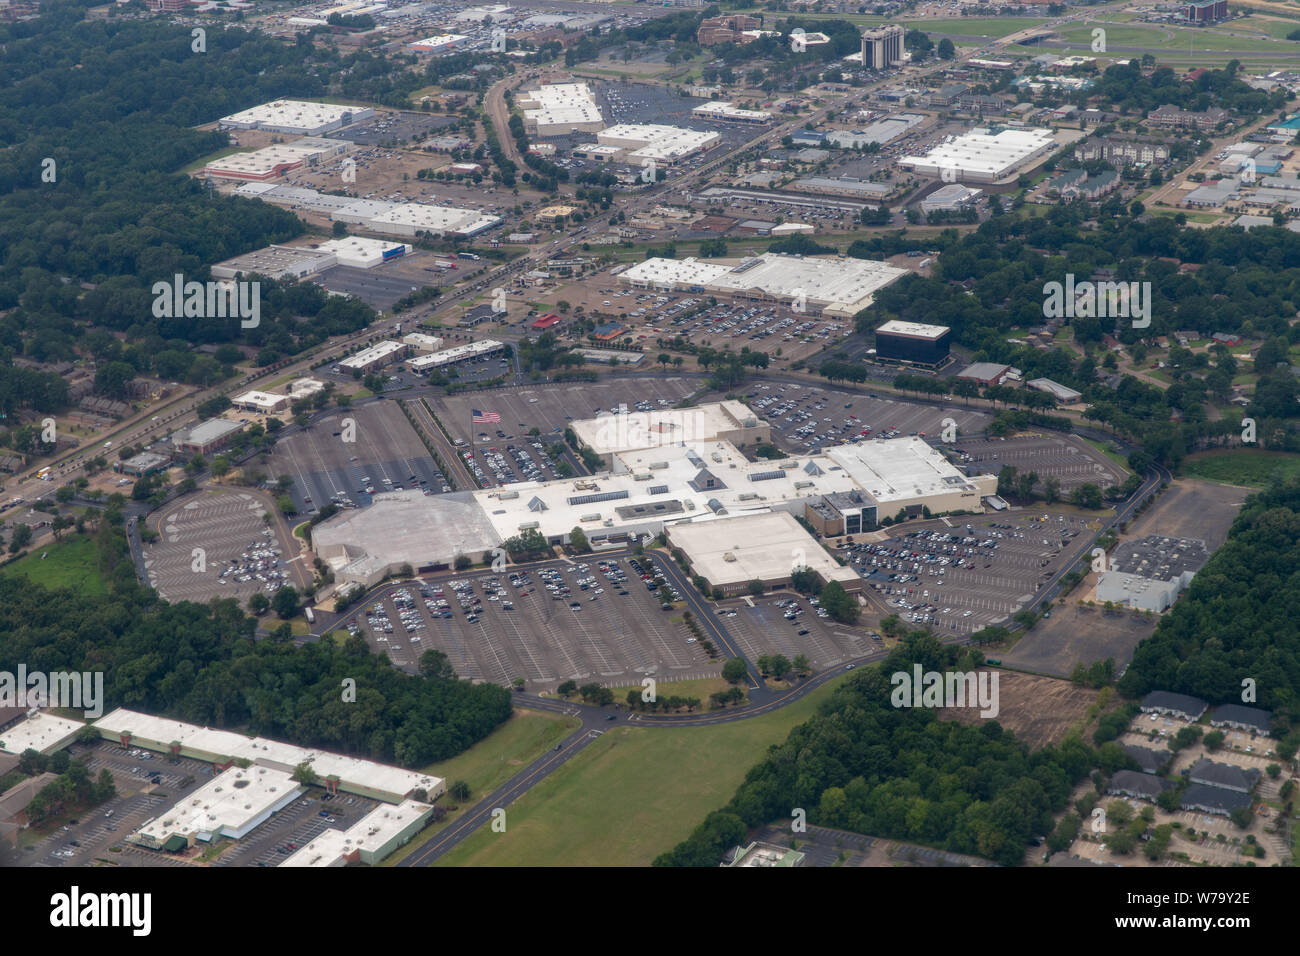 Opry Mills Mall - Images  Phoenix Aerial Photography Archives